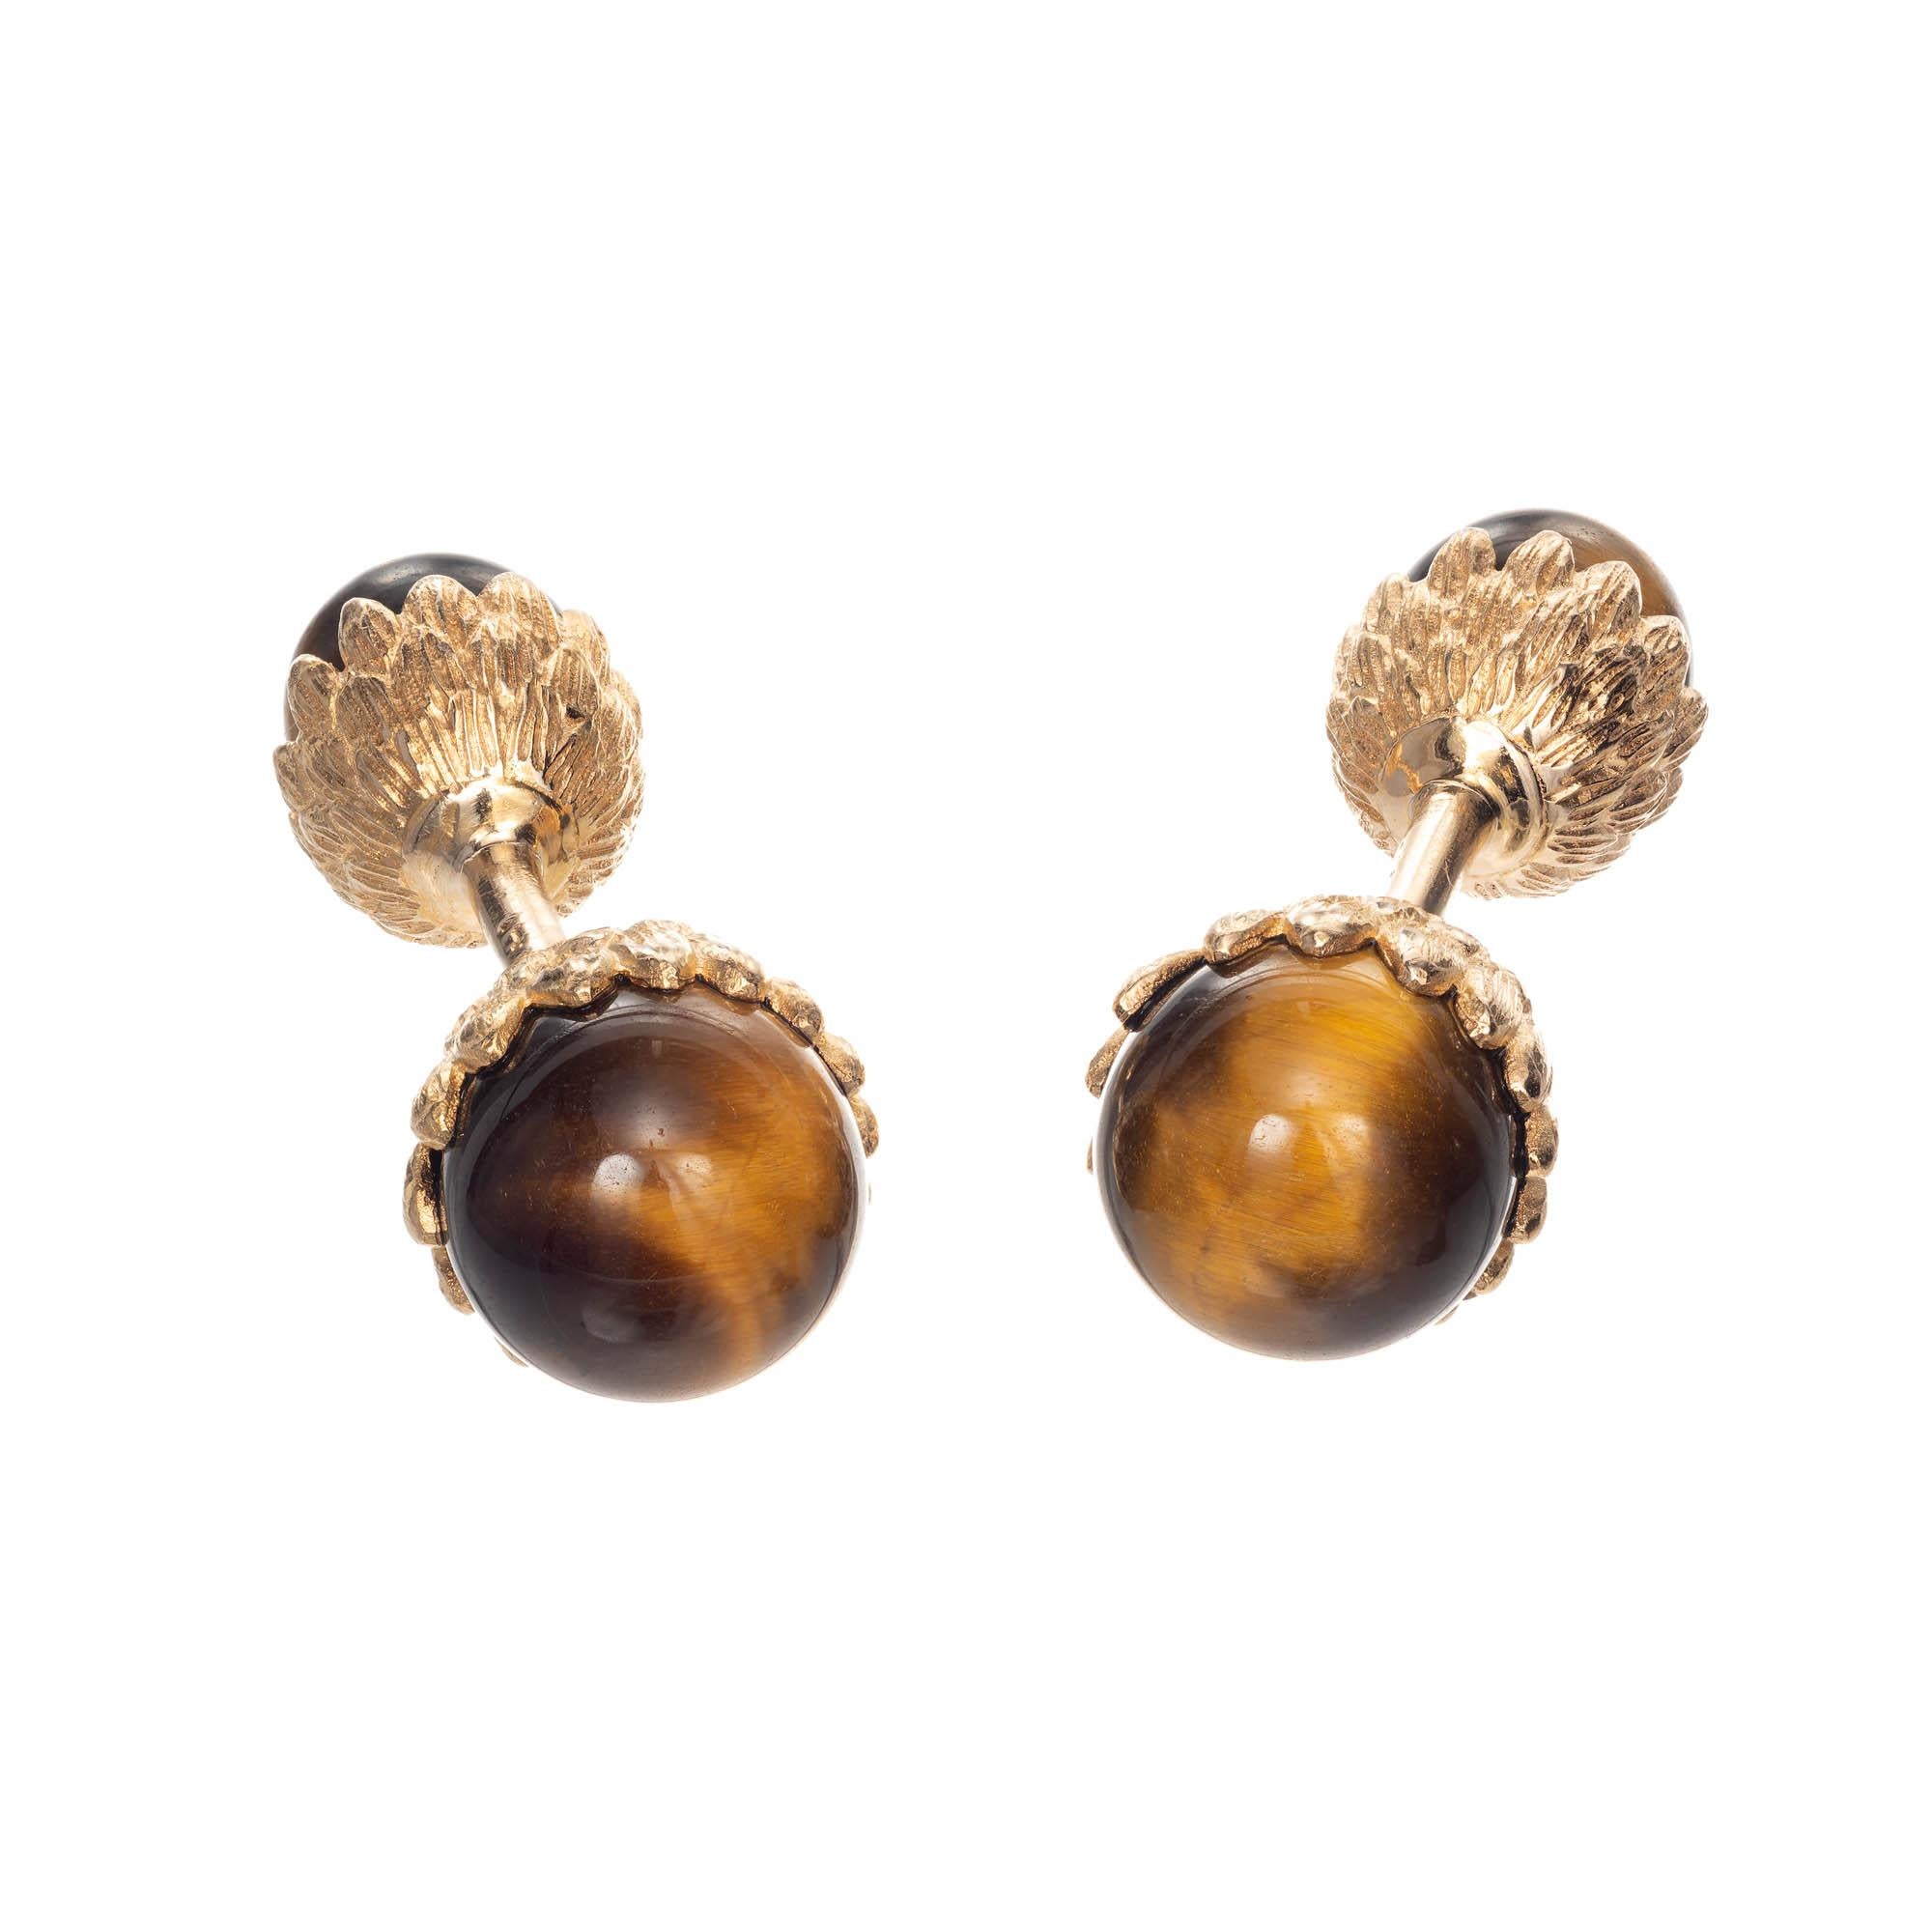 14k yellow gold Tiger Eye cuff links. A larger and smaller round Tiger’s Eye is set in 14k yellow gold majestic style setting.

2 brown & yellow Tiger’s Eye bead, 10mm 
2 brown & yellow Tiger’s Eye bead, 8mm 
14k yellow gold 
Tested and stamped: 14k